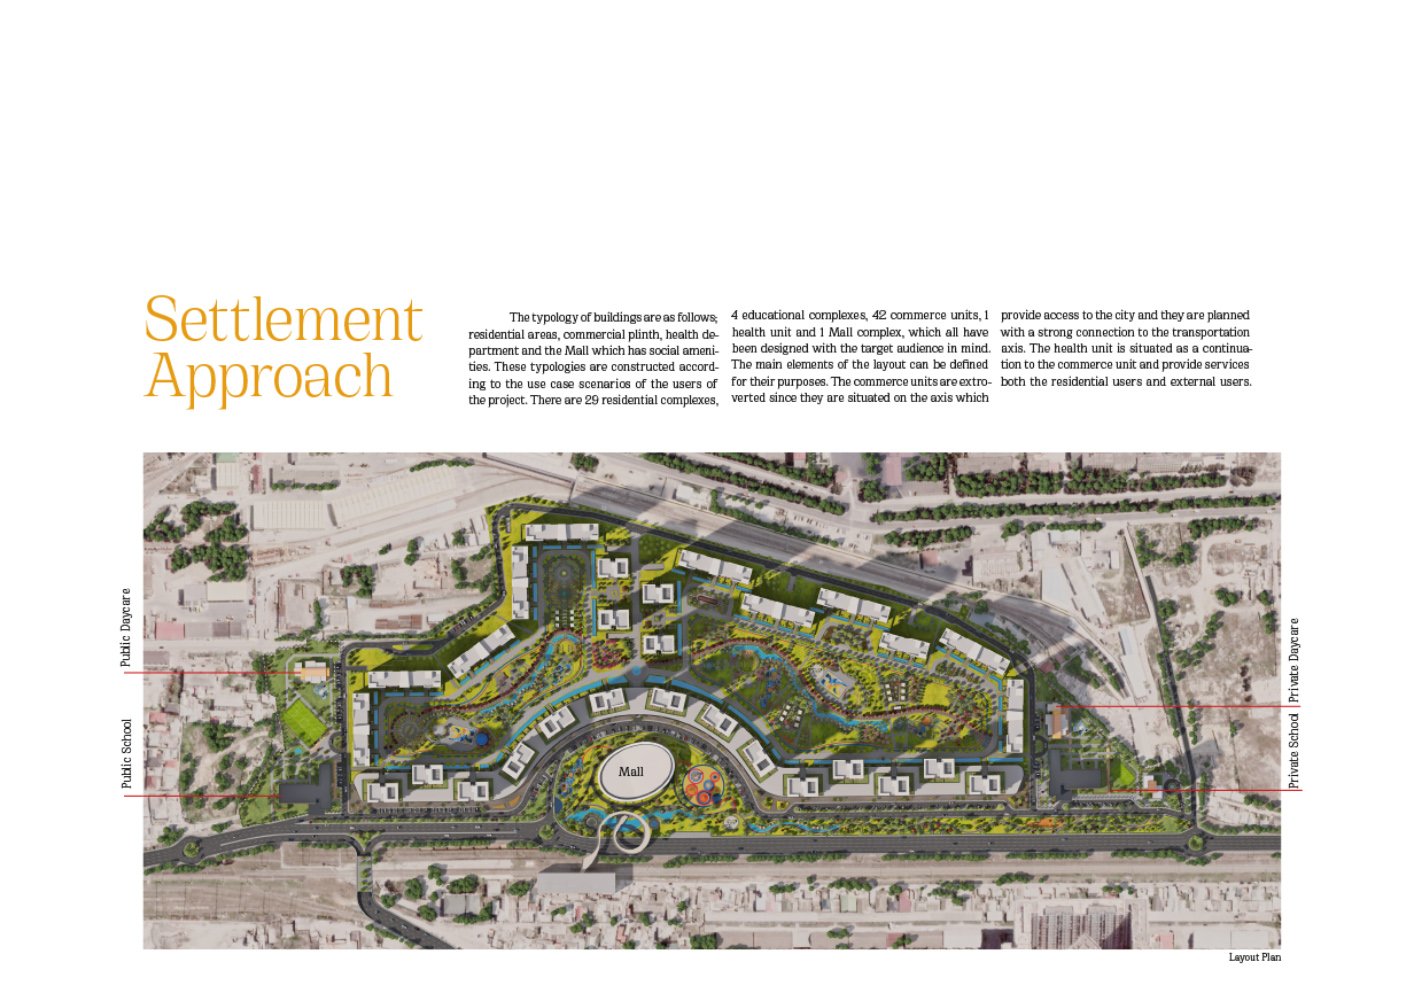 SETTLEMENT APPROACH | The typology of buildings are as follows; residential areas, commercial plinth, health department and the Mall.